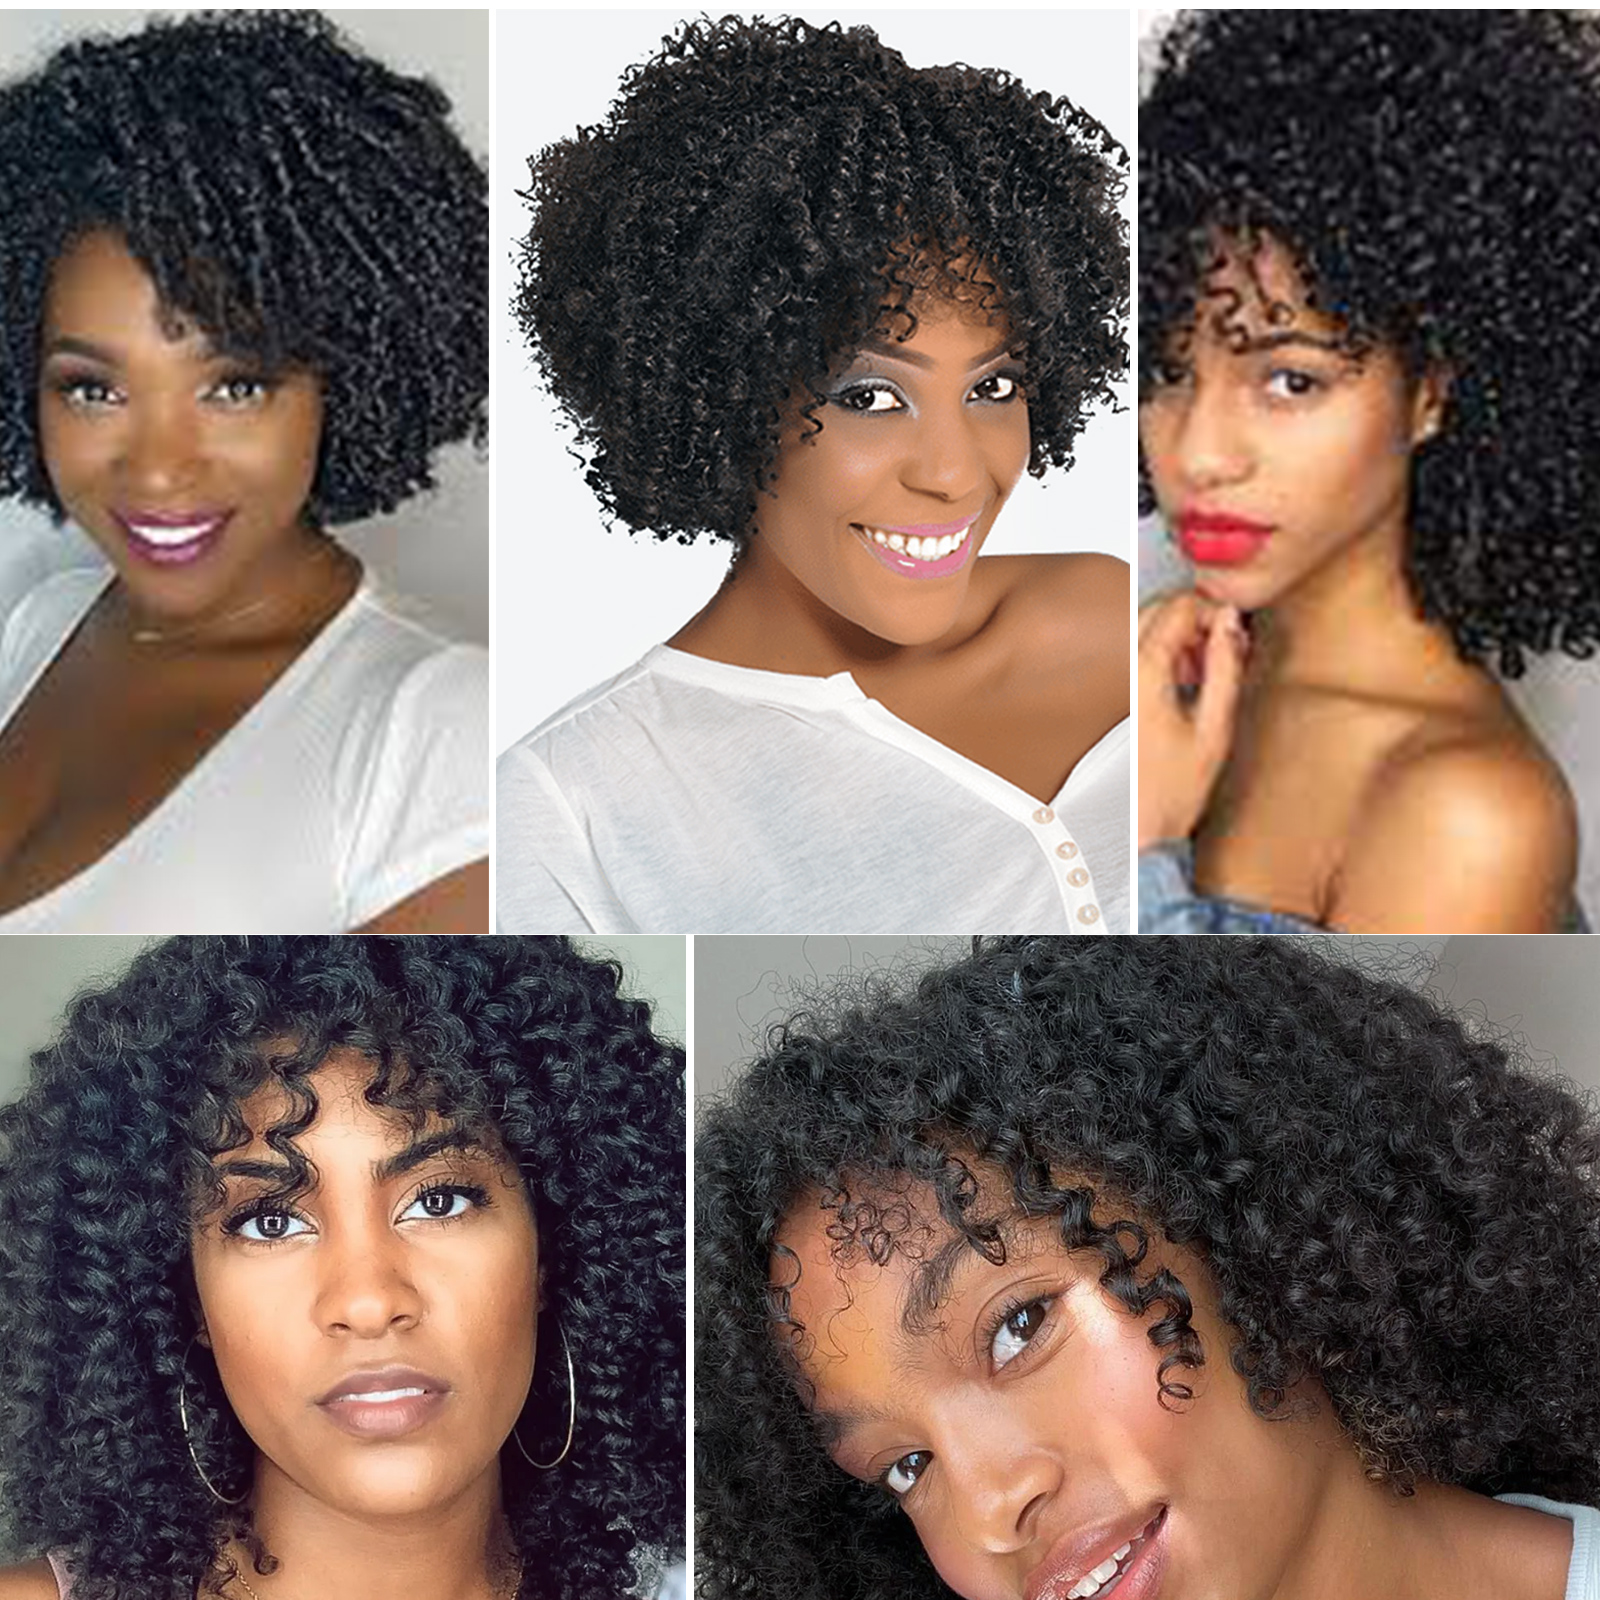 Afro Curl Bob Wig Lace Priding Lace Wig 14inch Kinky Curly Curly Natural Virgin Remy Human Hair Hair Drawlock Wig Twist